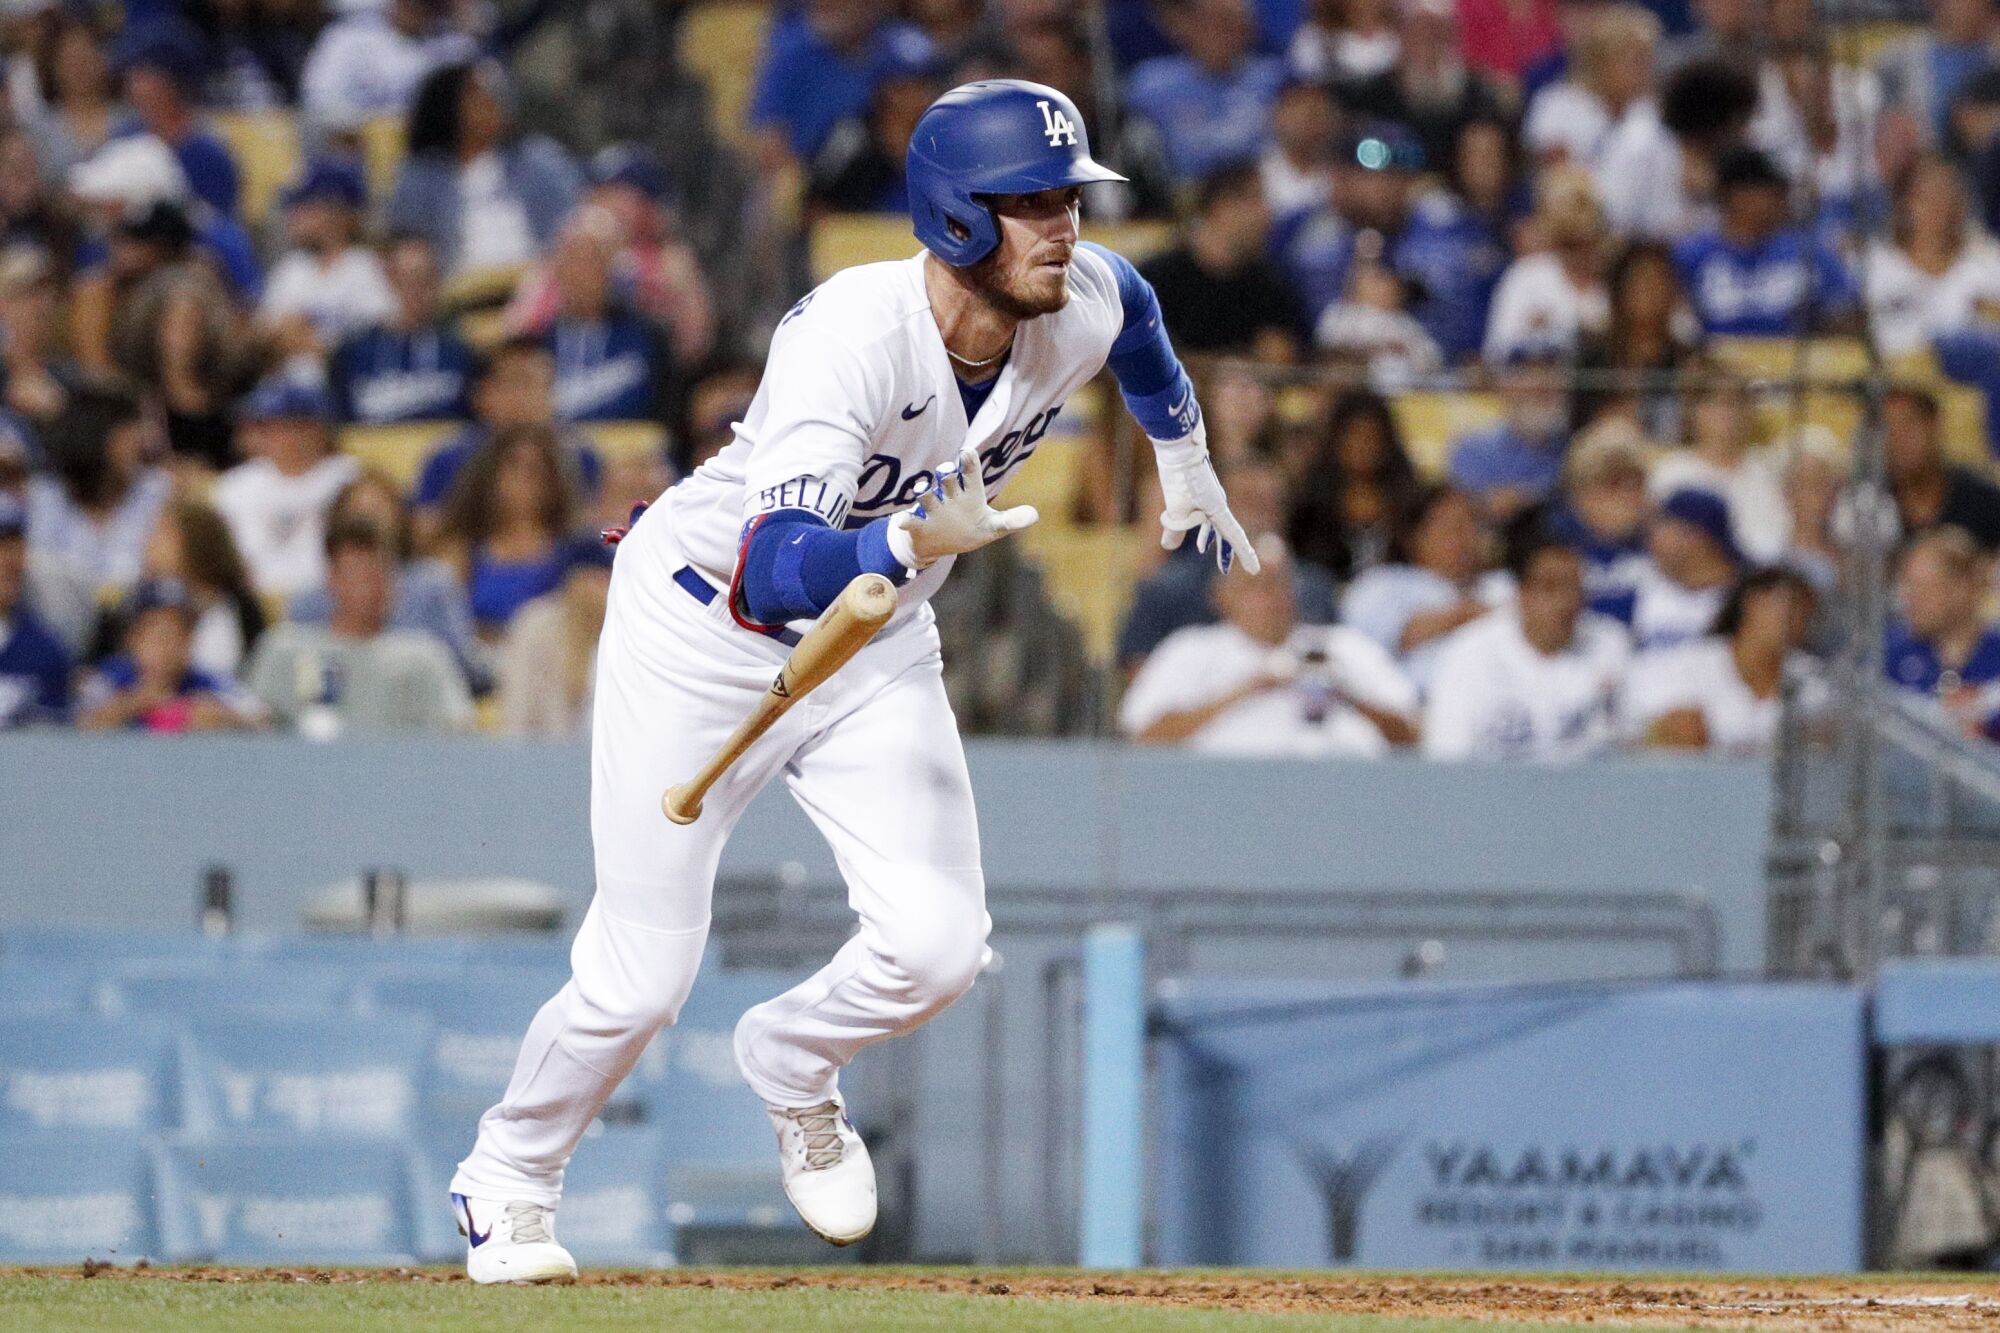 The Dodgers' Cody Bellinger tosses his bat after hitting a single against the Colorado Rockies Wednesday